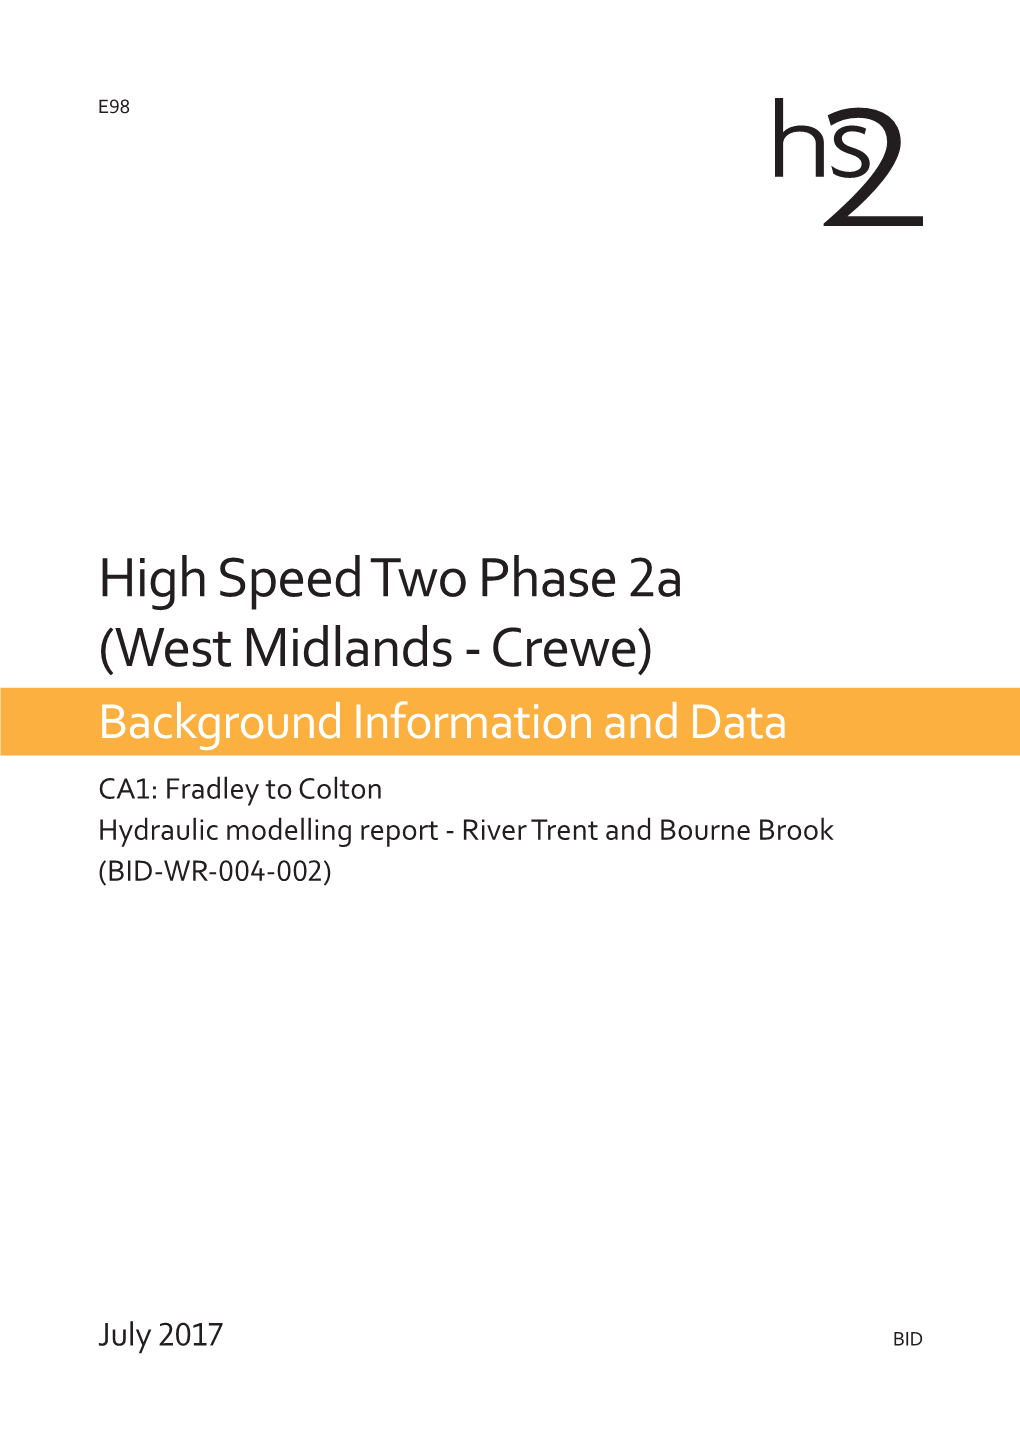 High Speed Two Phase 2A (West Midlands